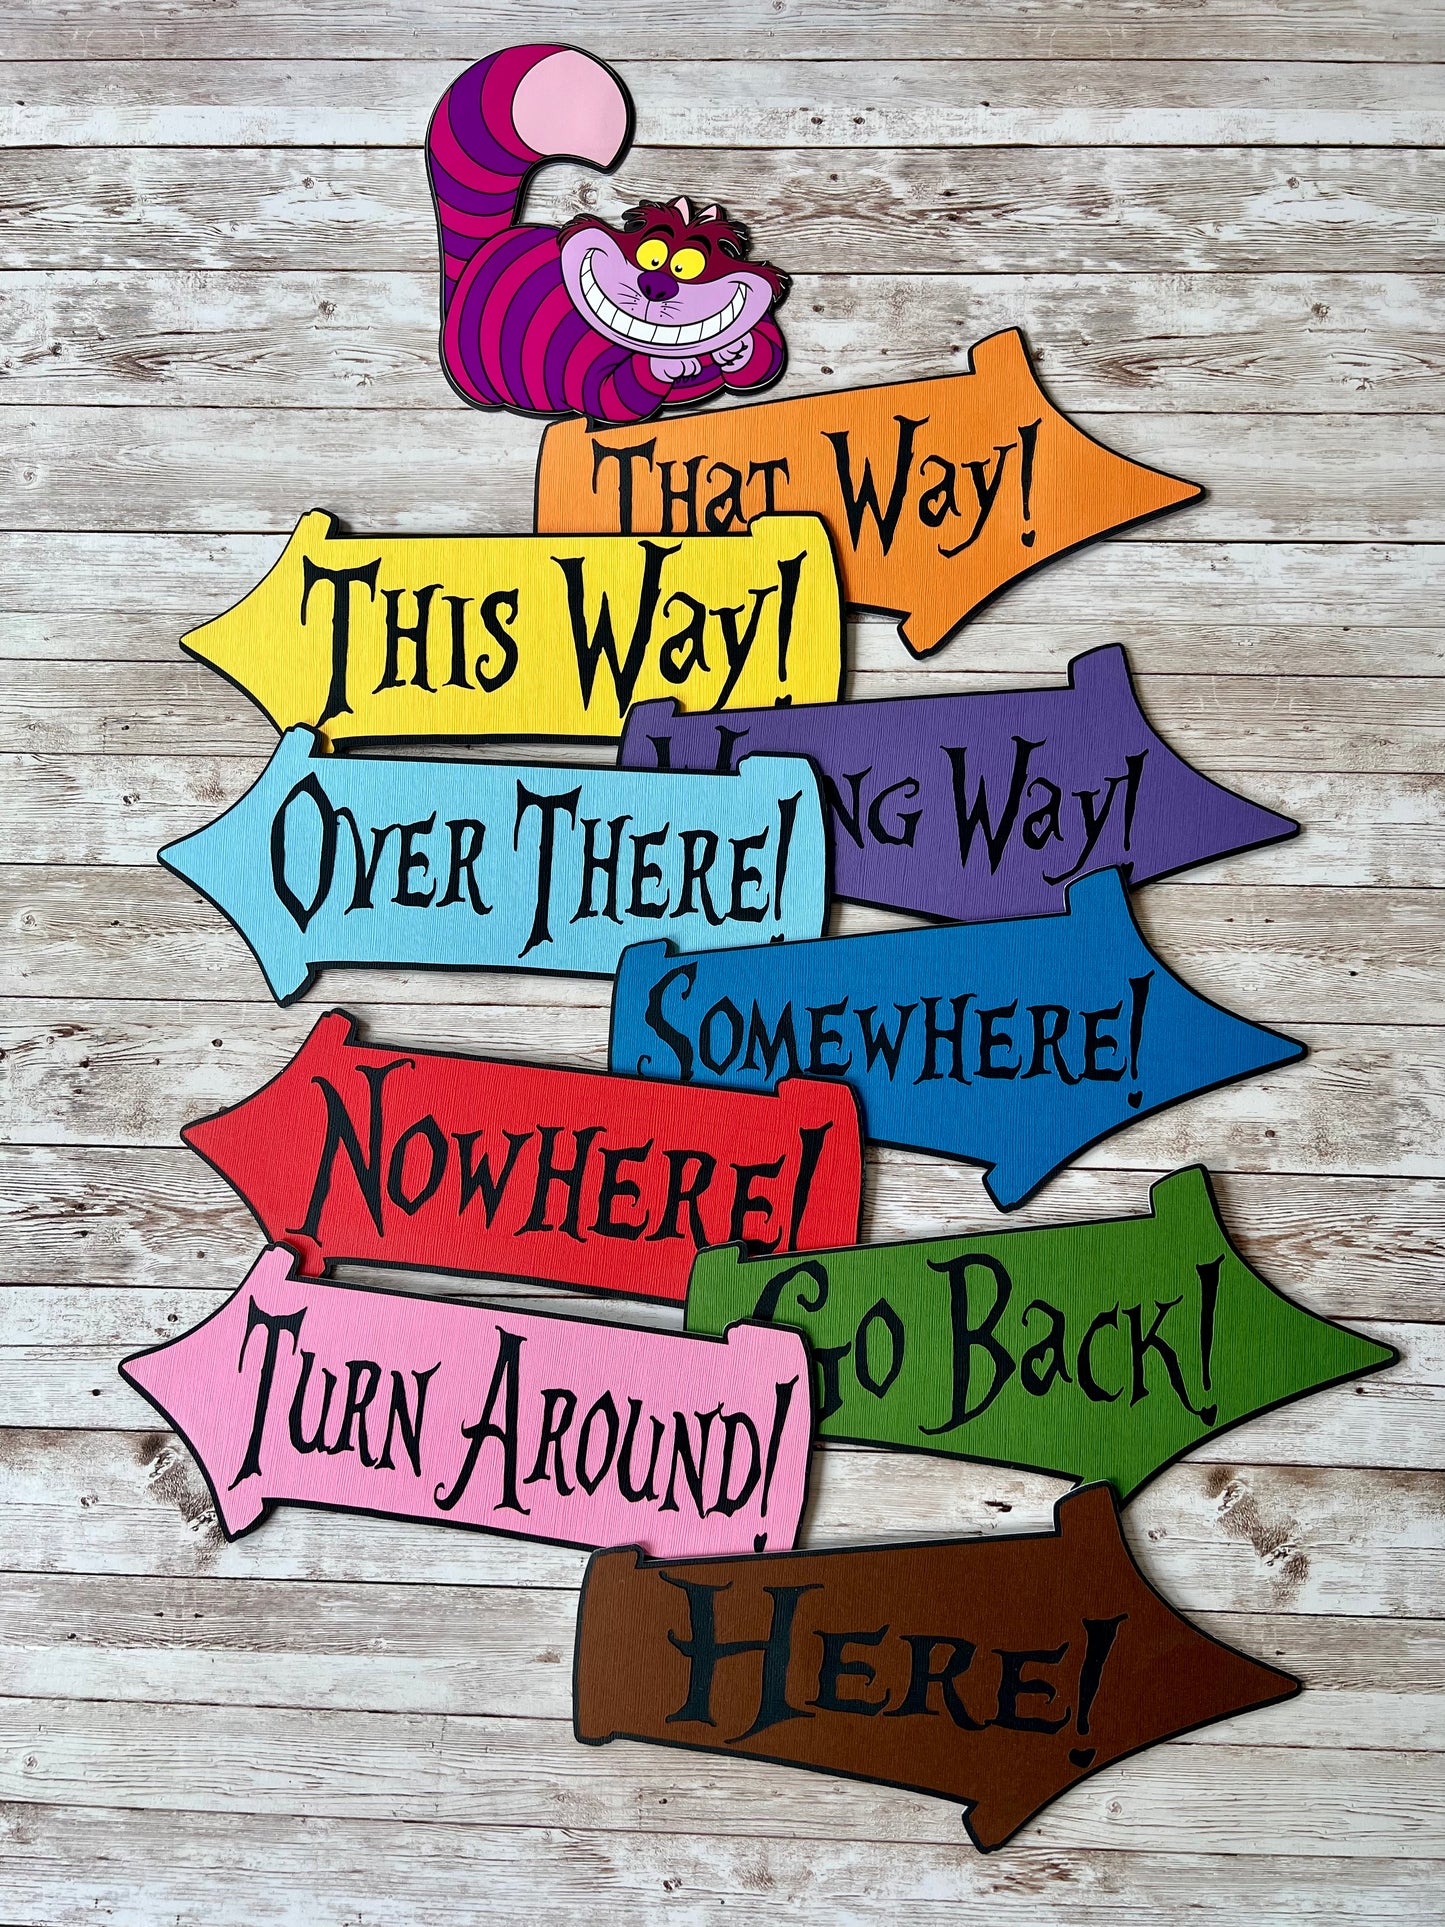 Alice in Wonderland Party Signs